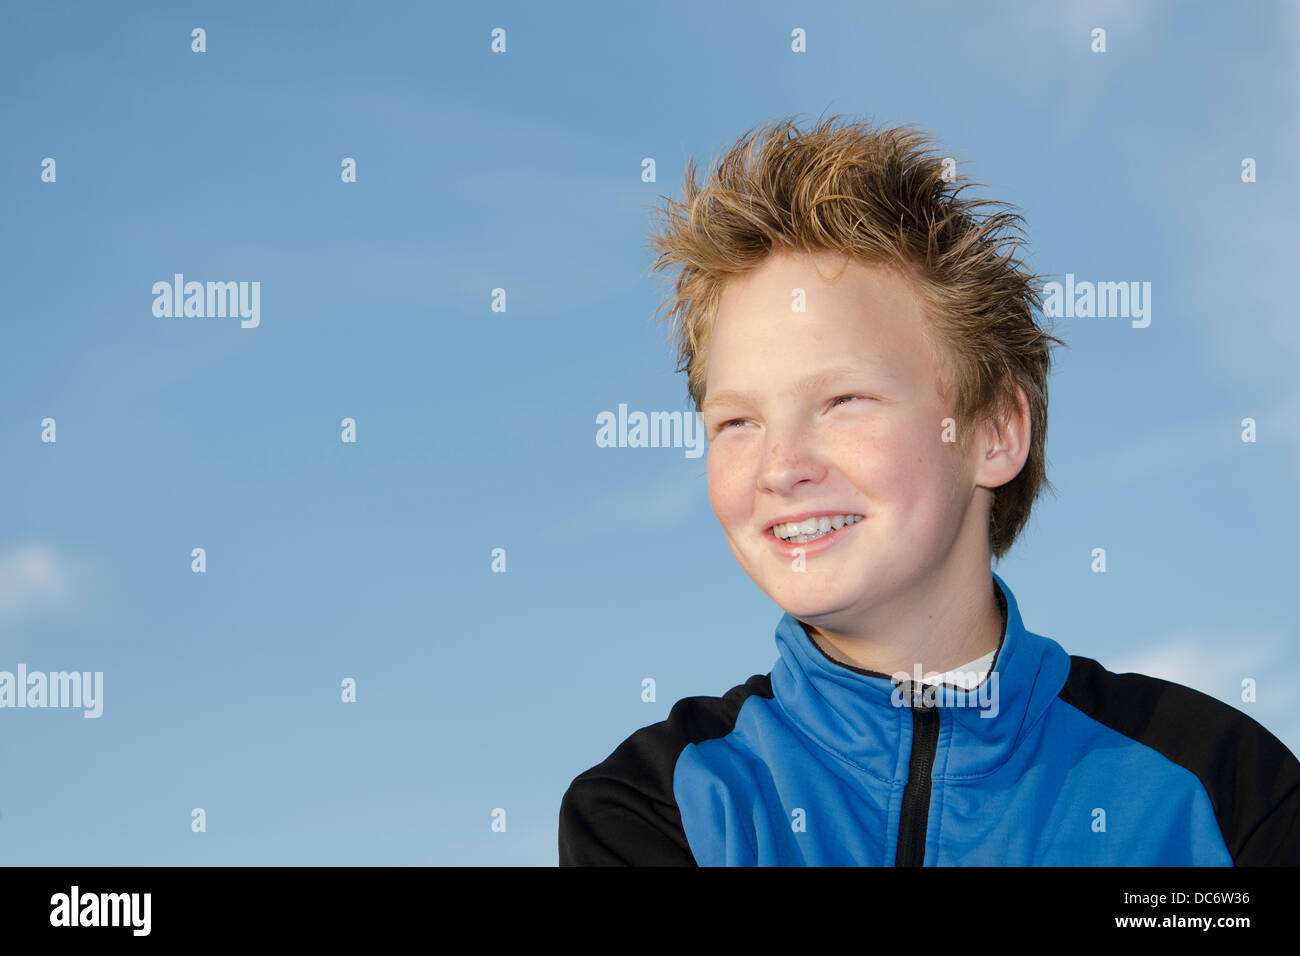 Portrait of happy teenager with spiky hairstyle against sky Stock Photo